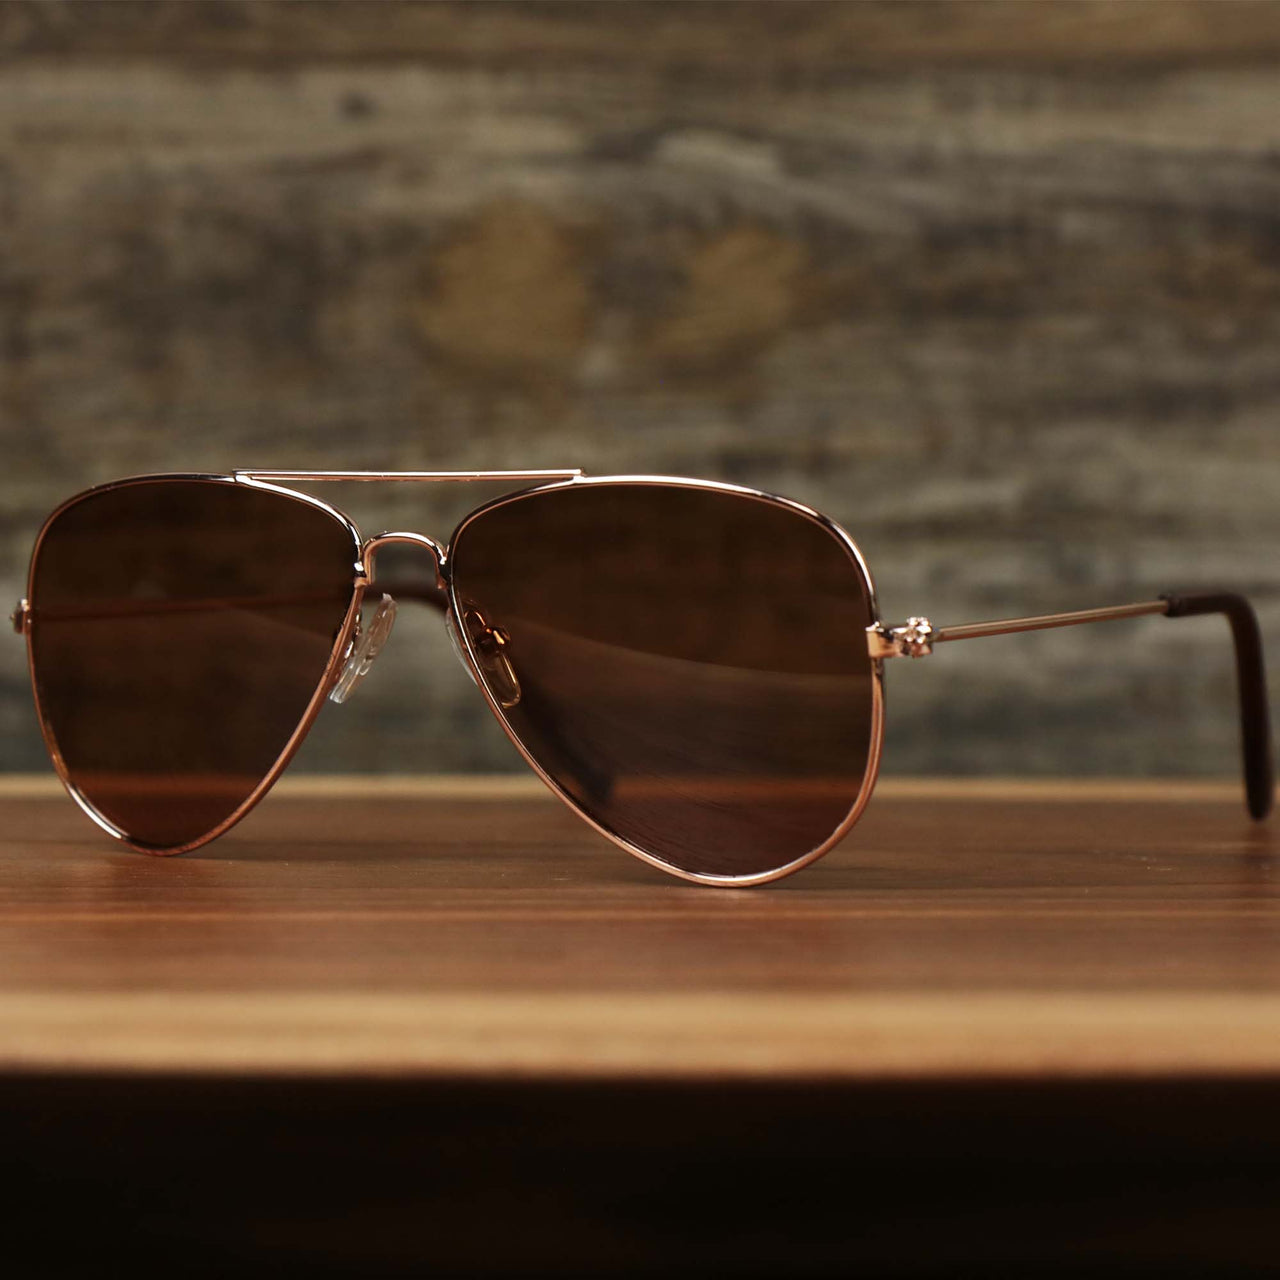 The Kid’s Aviator Frame Brown Lens Sunglasses with Rose Gold Frame